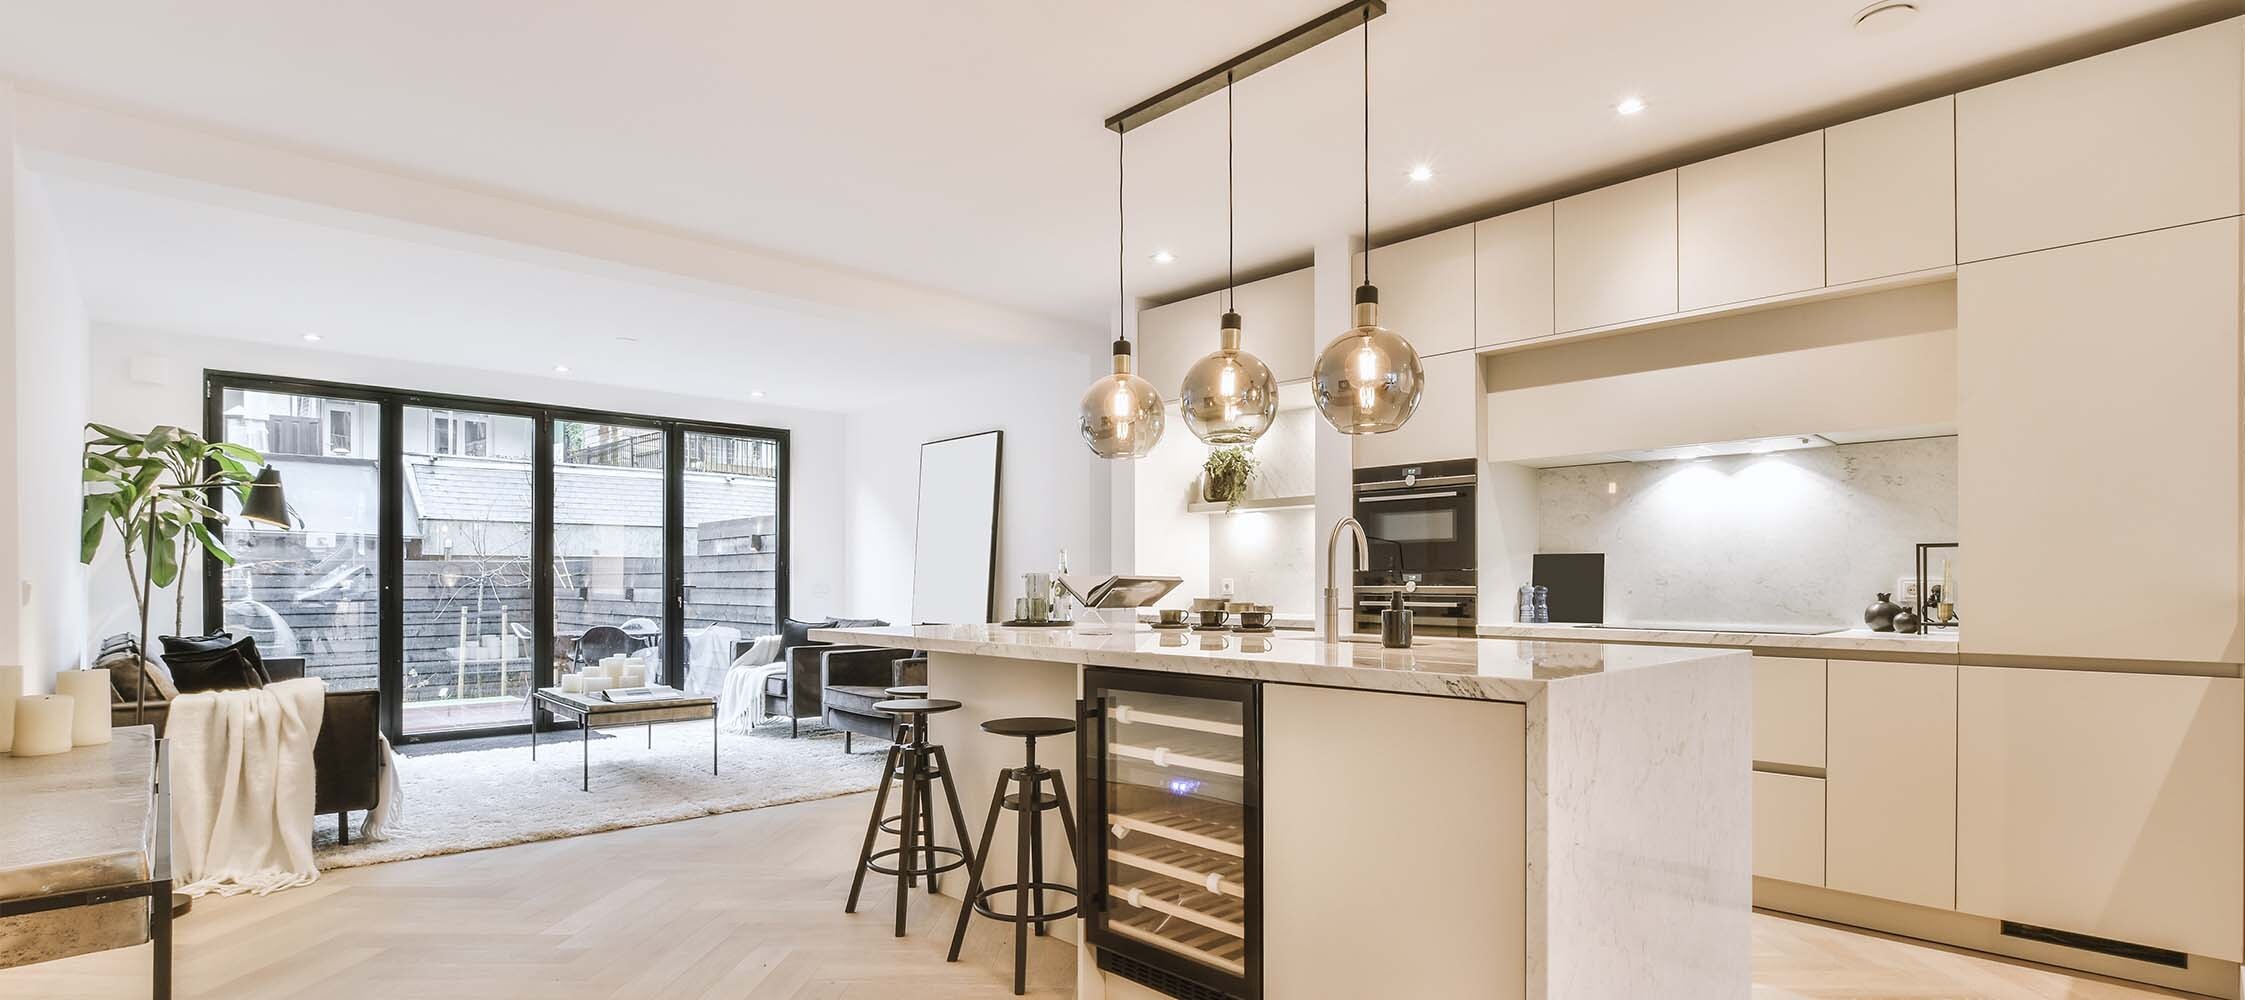 A sleek and sophisticated kitchen renovation by Interiors By Alanna in Kitchener-Waterloo, maximizing storage space and functionality for the homeowner's needs, creating a dream kitchen in your KW home.